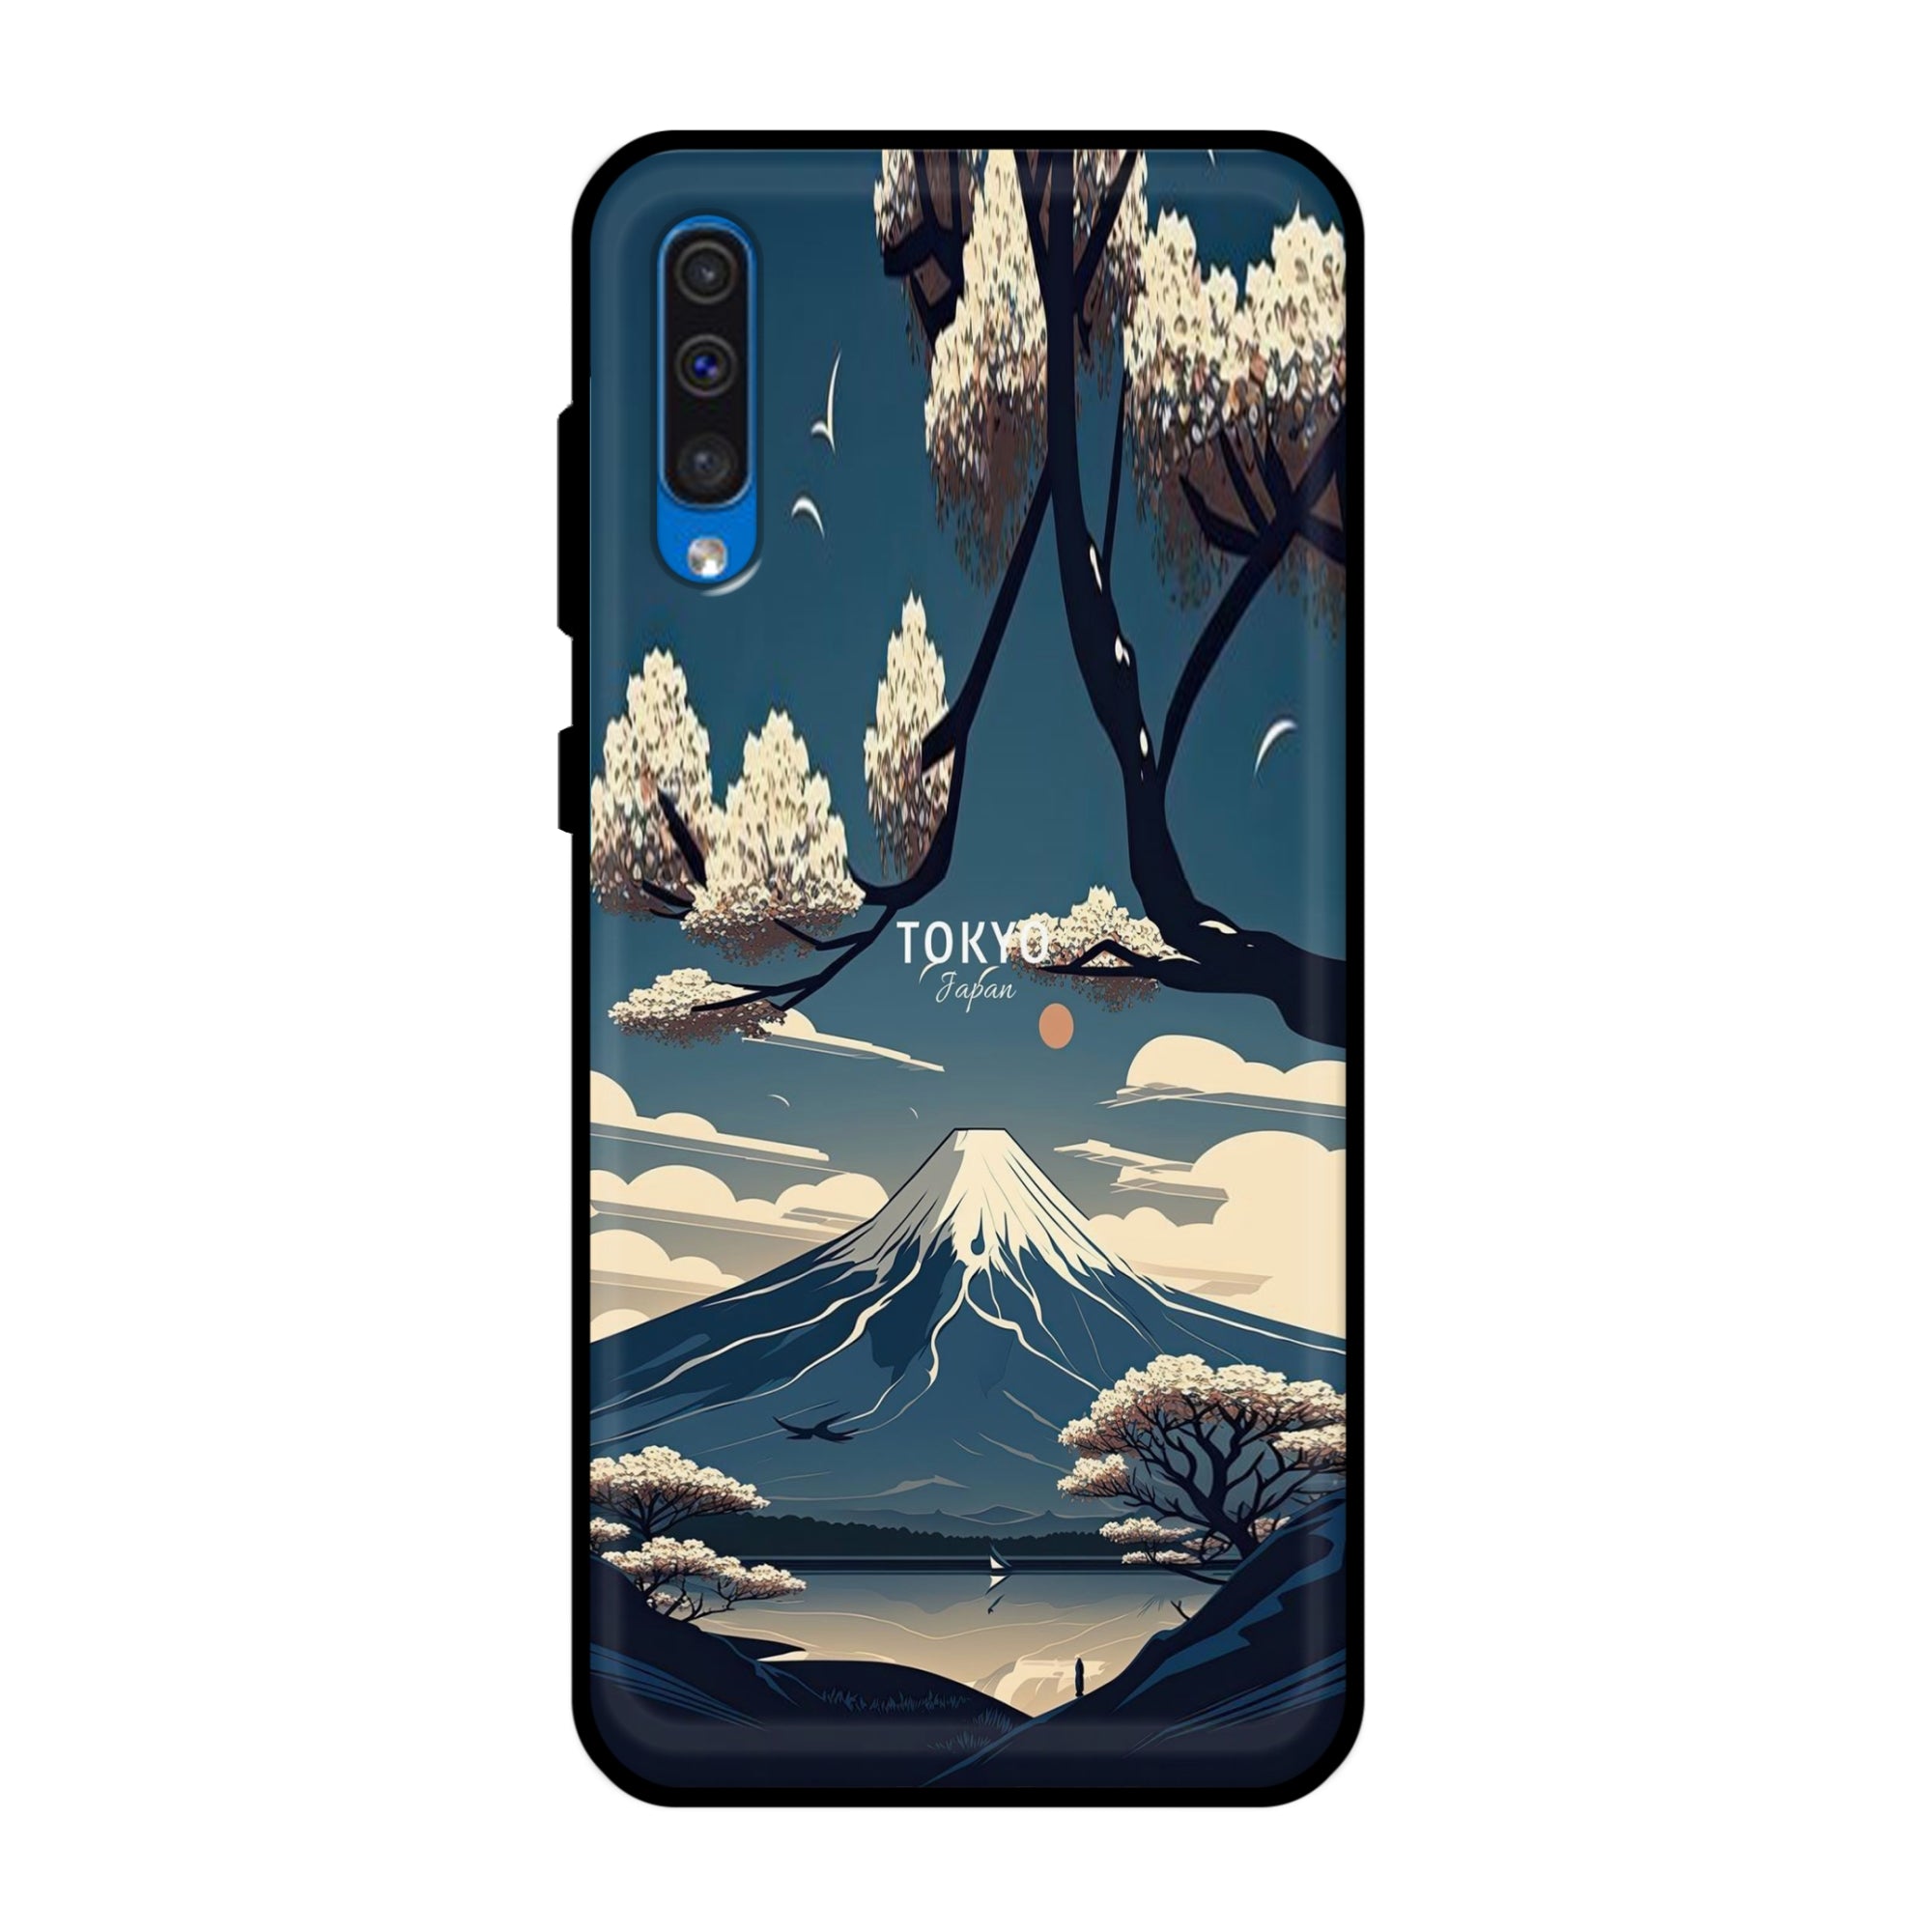 Buy Tokyo Metal-Silicon Back Mobile Phone Case/Cover For Samsung Galaxy A50 / A50s / A30s Online